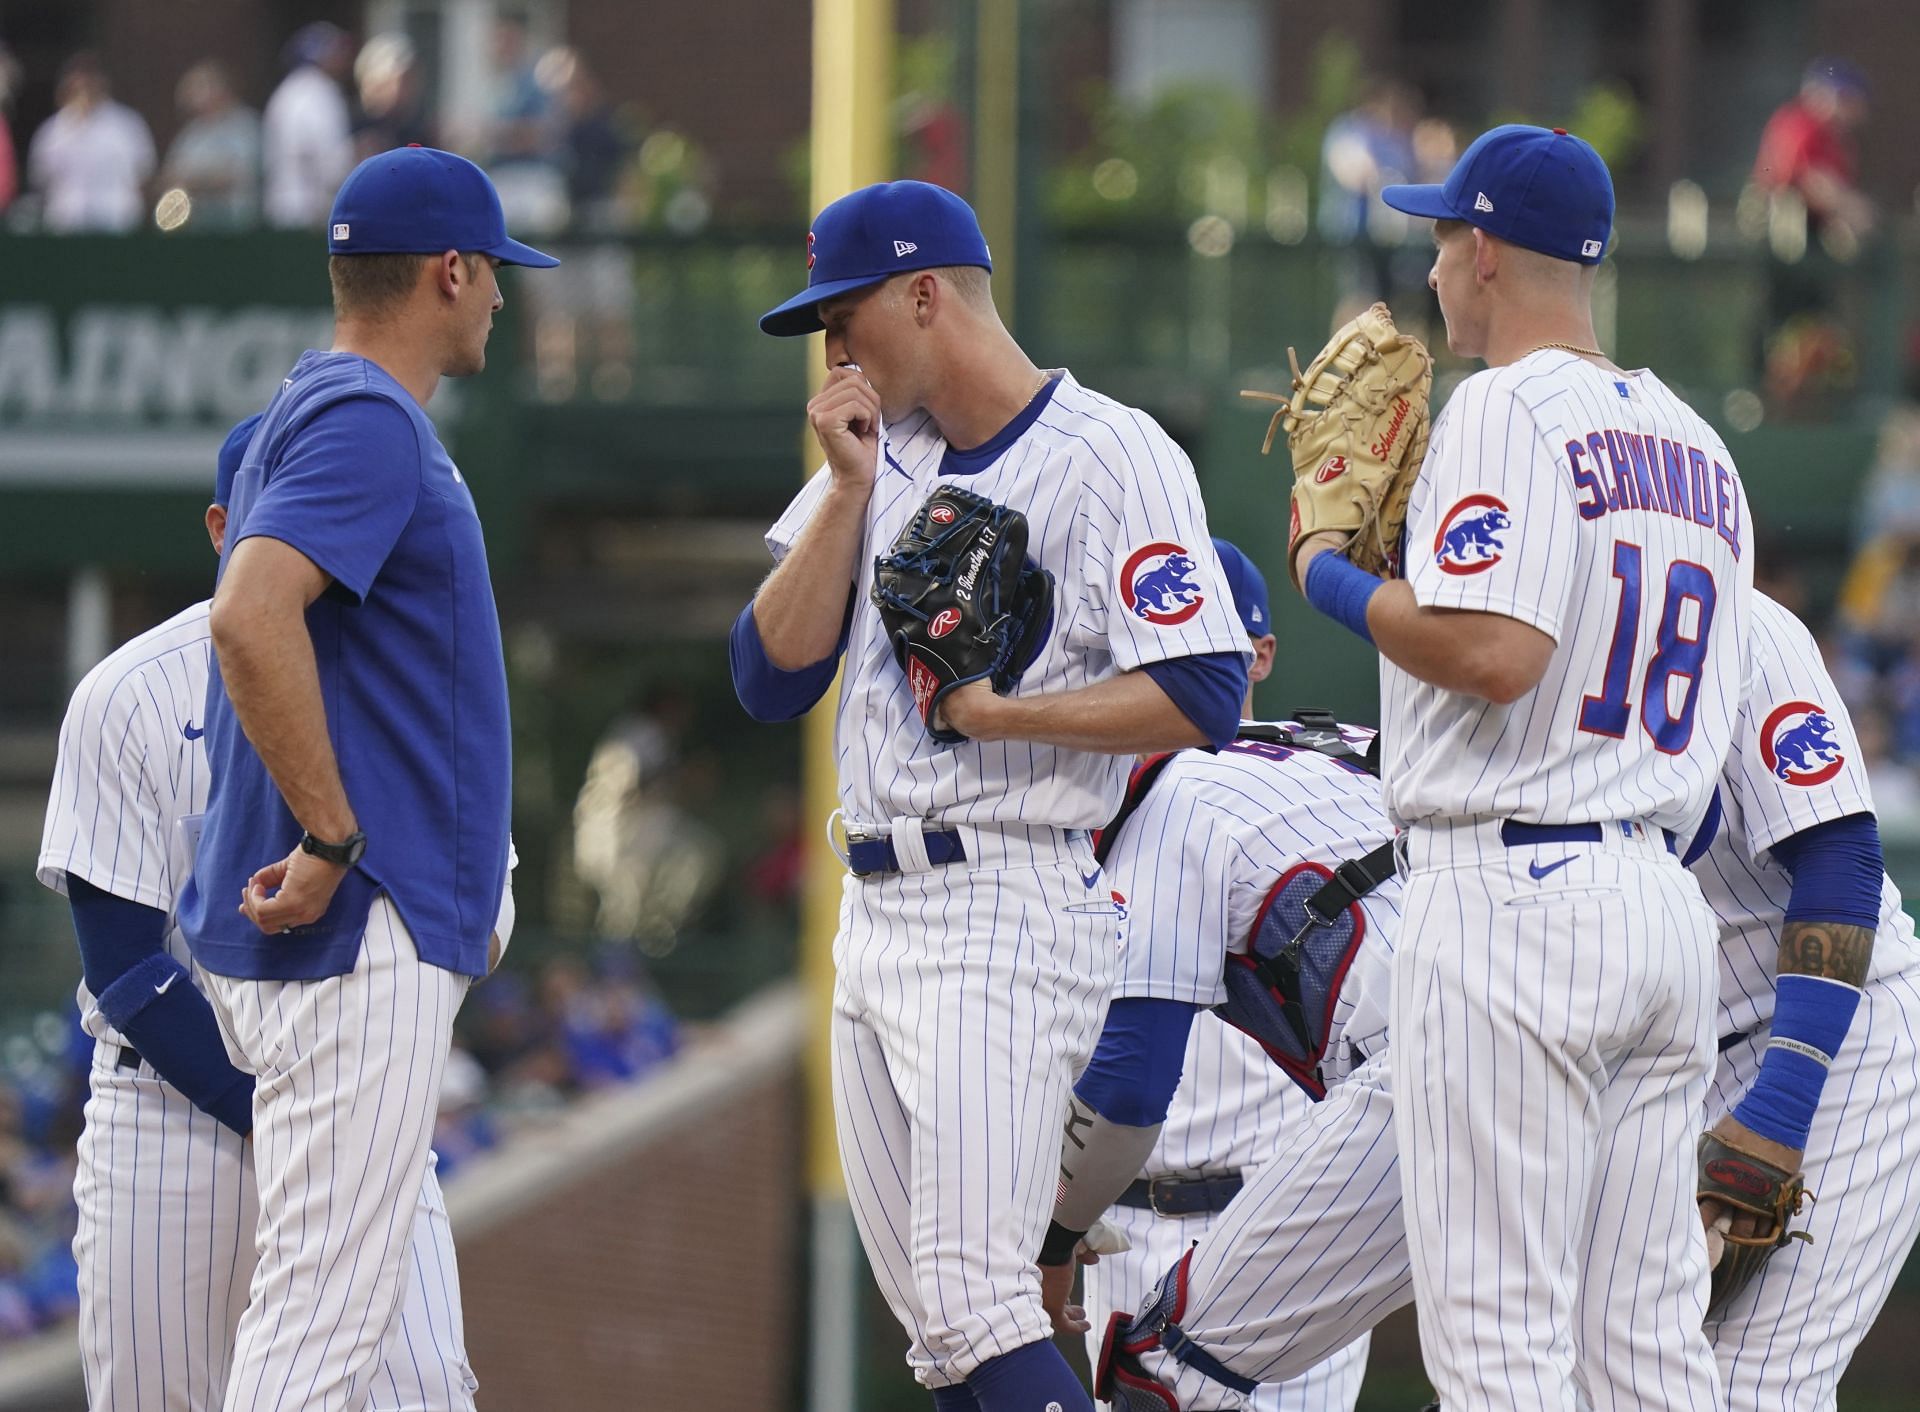 The Cubs need to make adjustments to win a game.